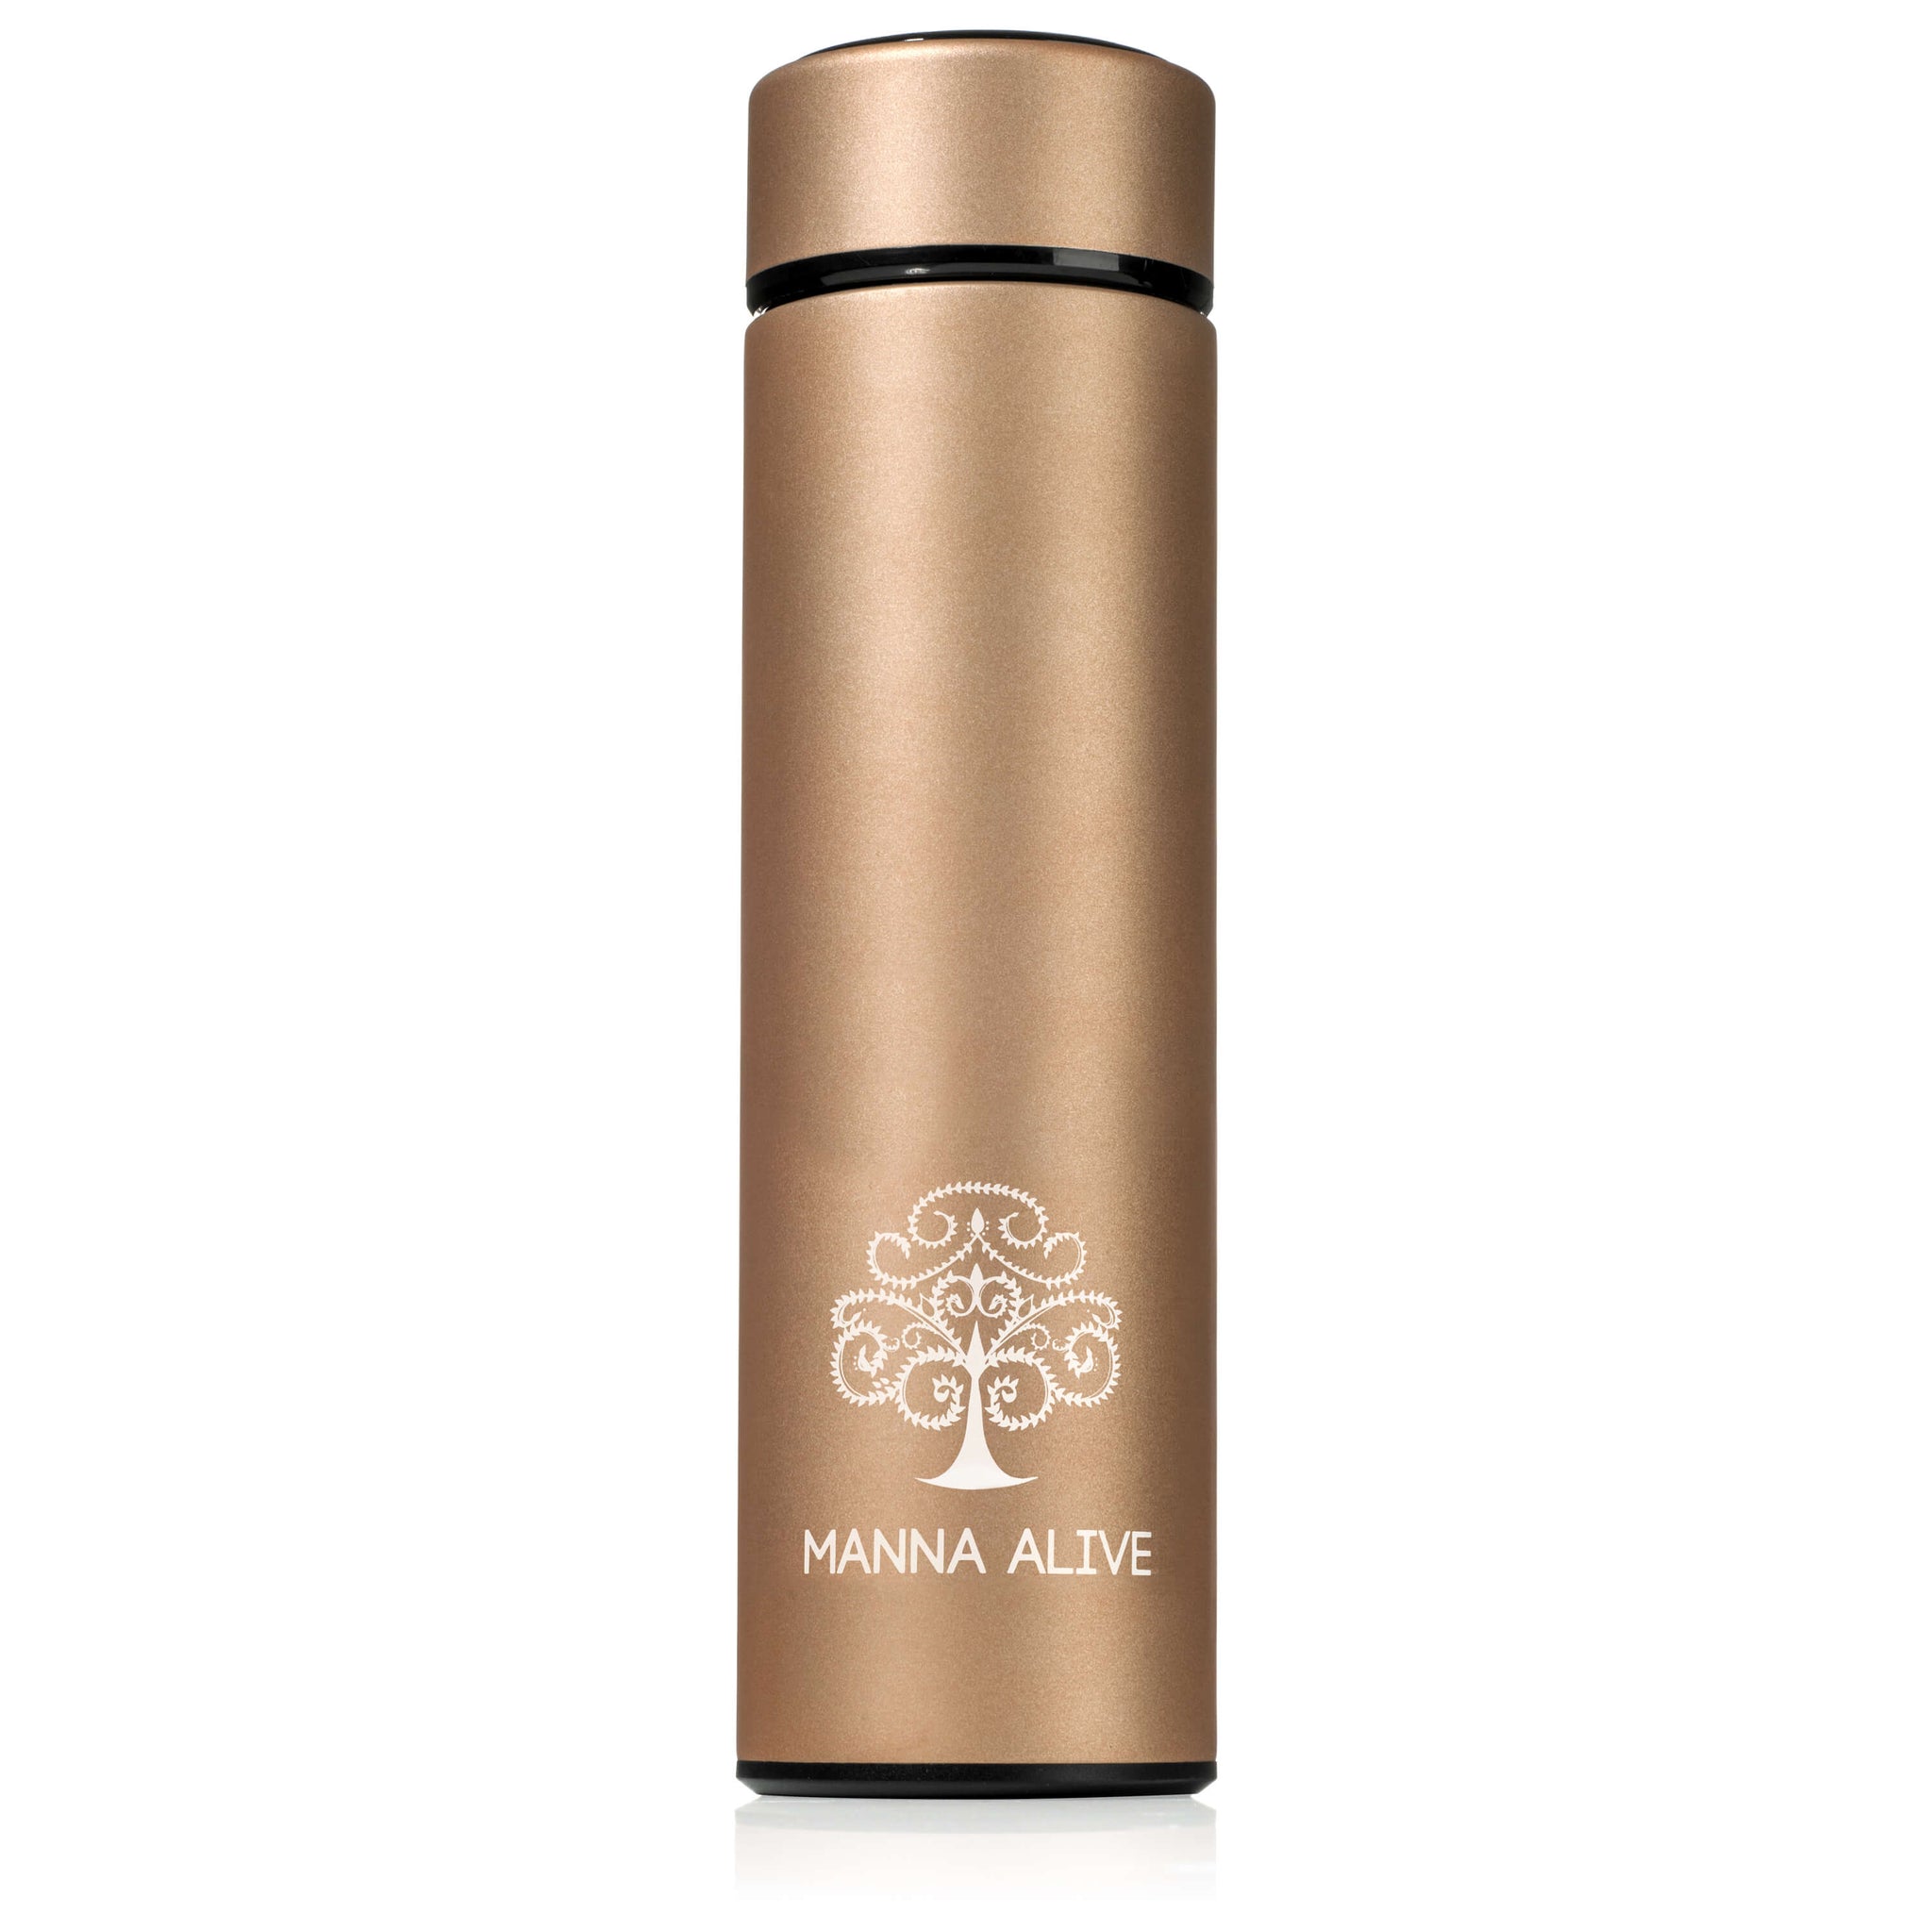 Manna Alive - Stainless Steel Thermos Water Bottle, 16.9 oz